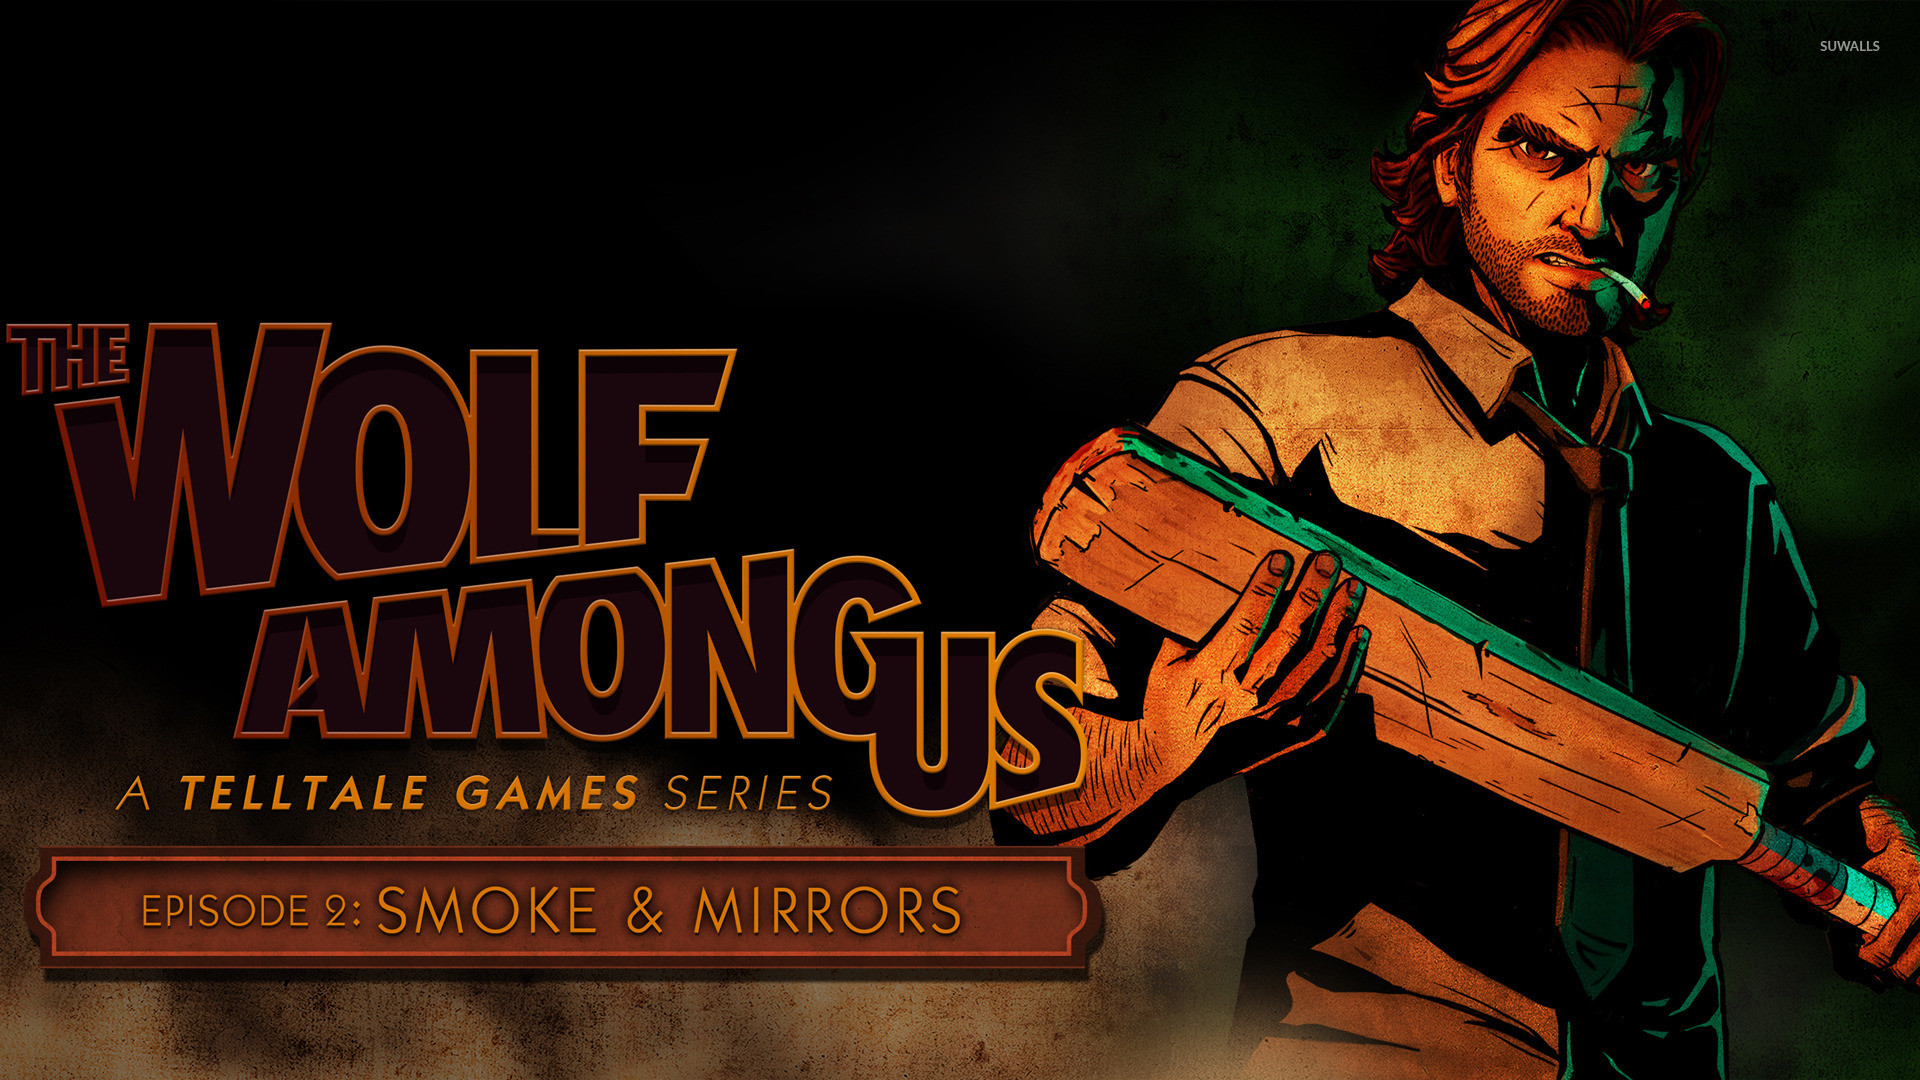 1920x1080 The Wolf Among Us [4] wallpaper